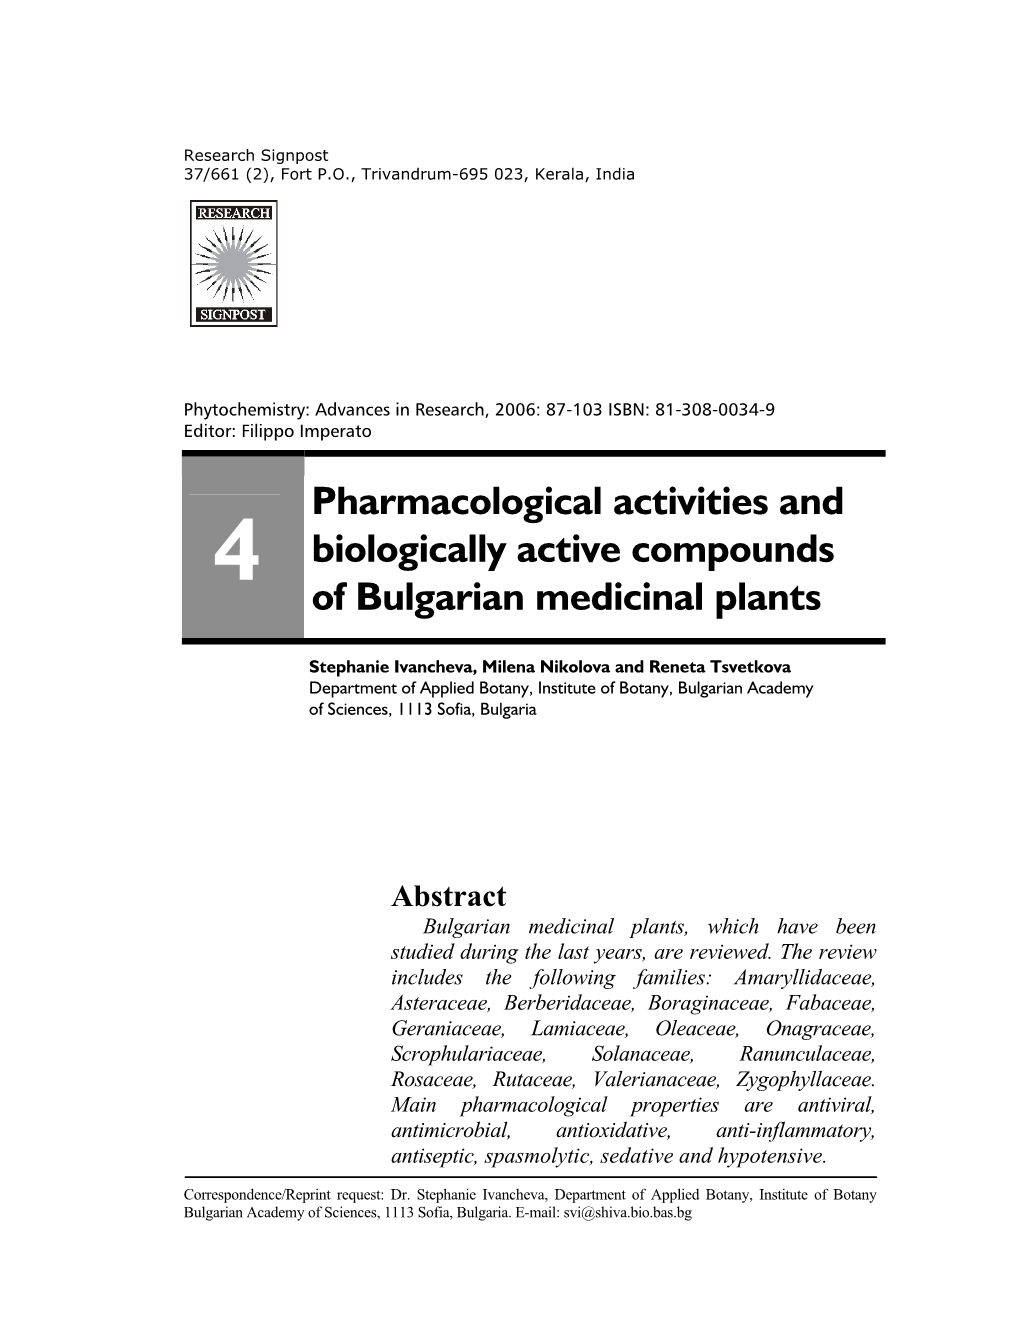 Pharmacological Activities and Biologically Active Compounds Of